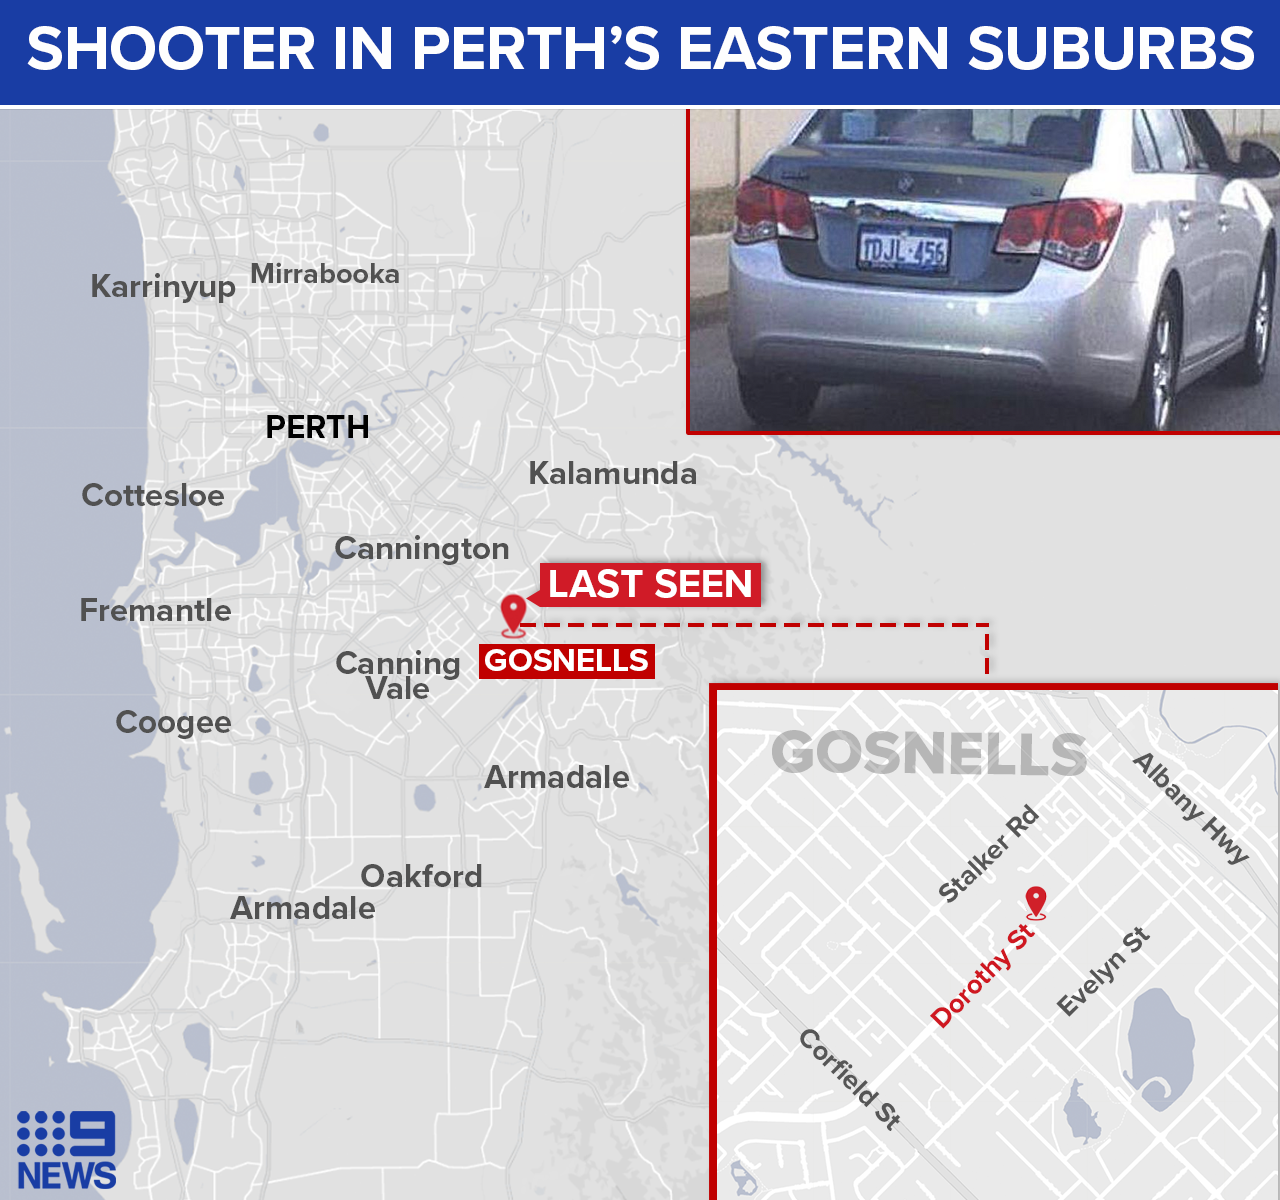 The car was last seen in Gosnells.